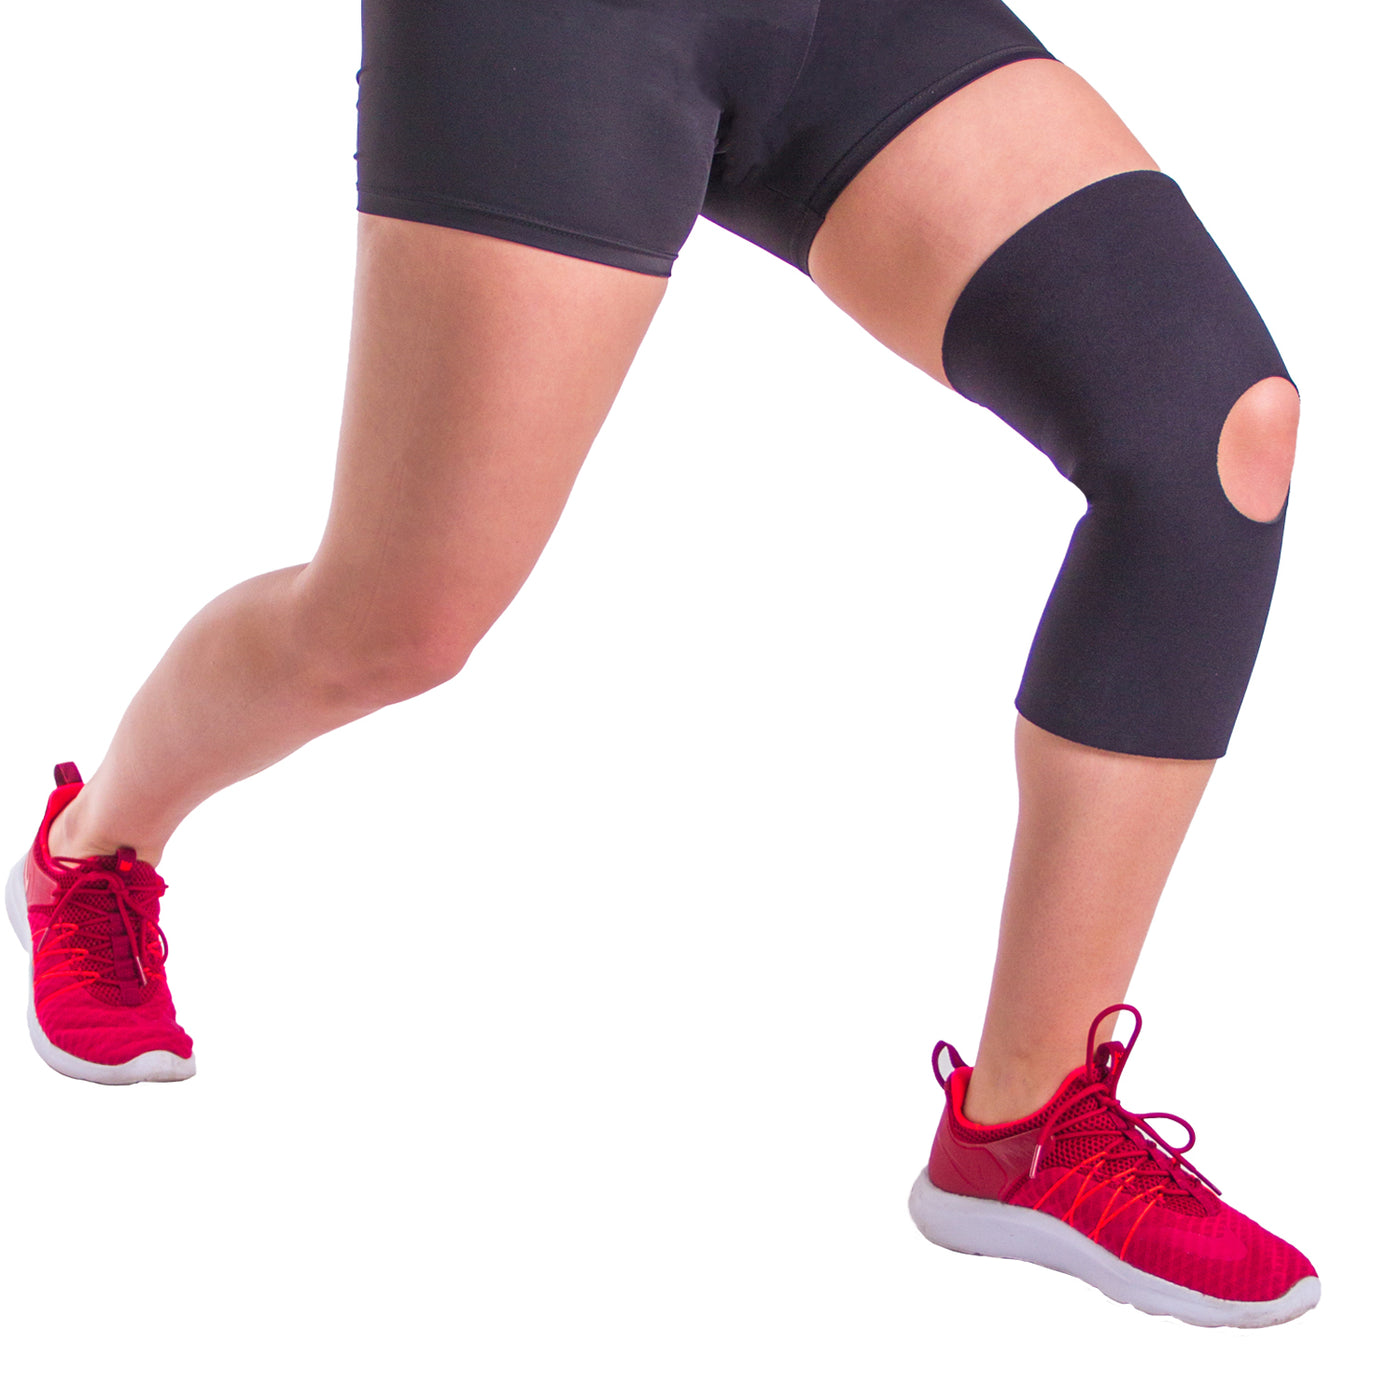 Neoprene material provides warmth and moderate elastic compression to your sore knee